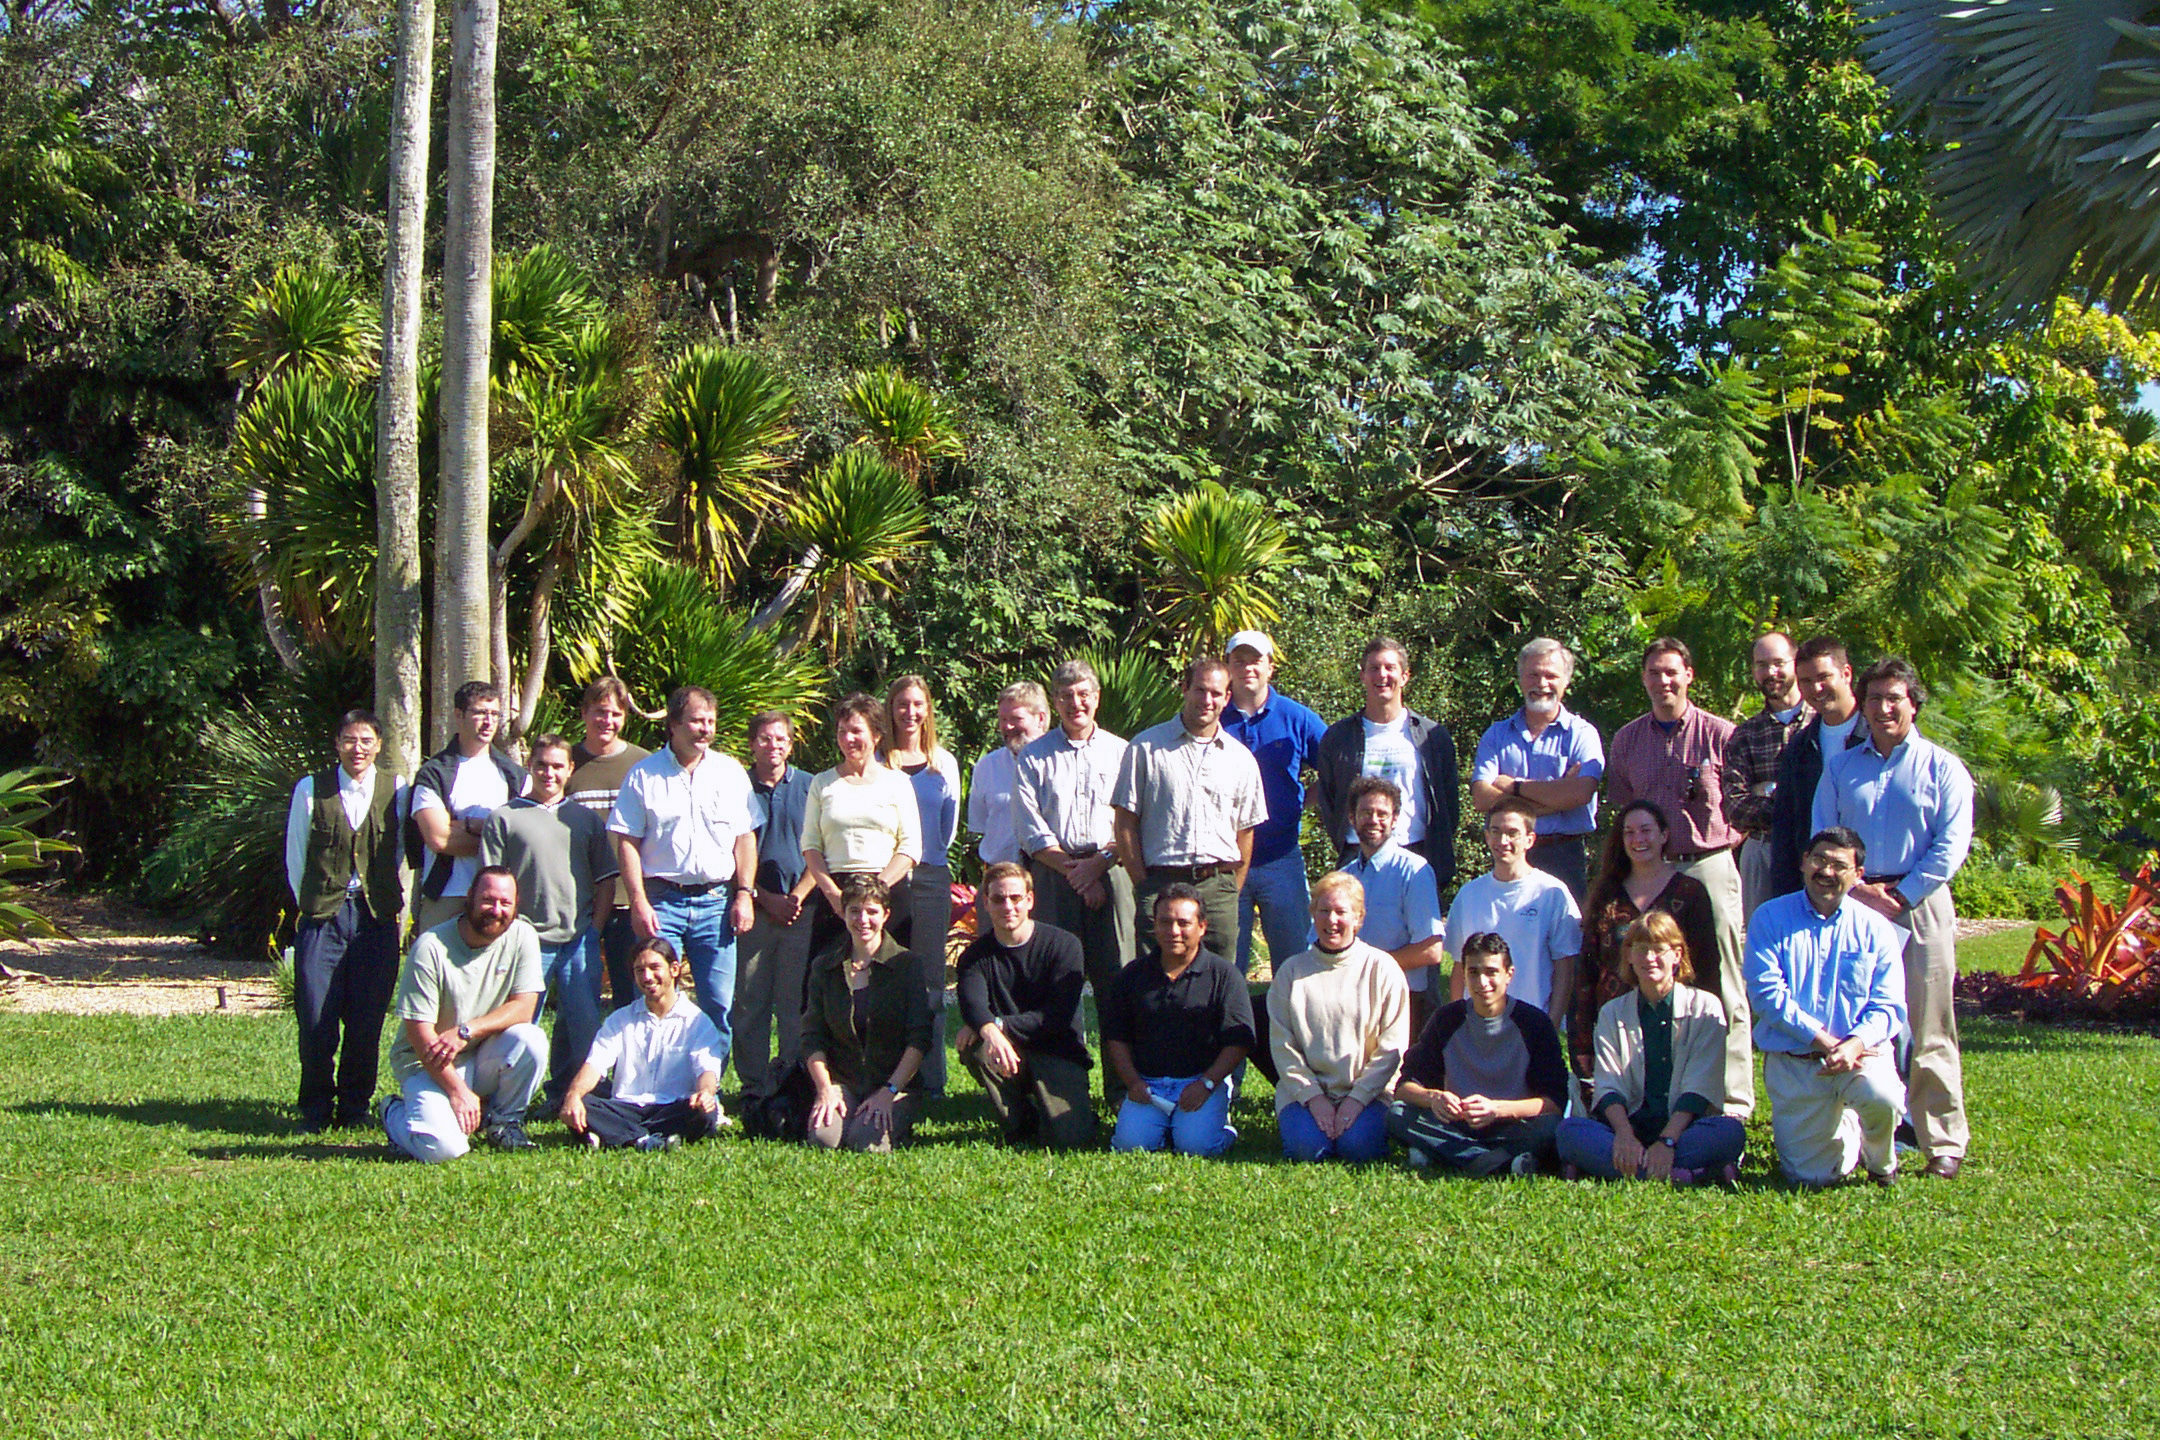 Group photo from the 2003 Florida Coastal Everglades LTER All Scientists Meeting